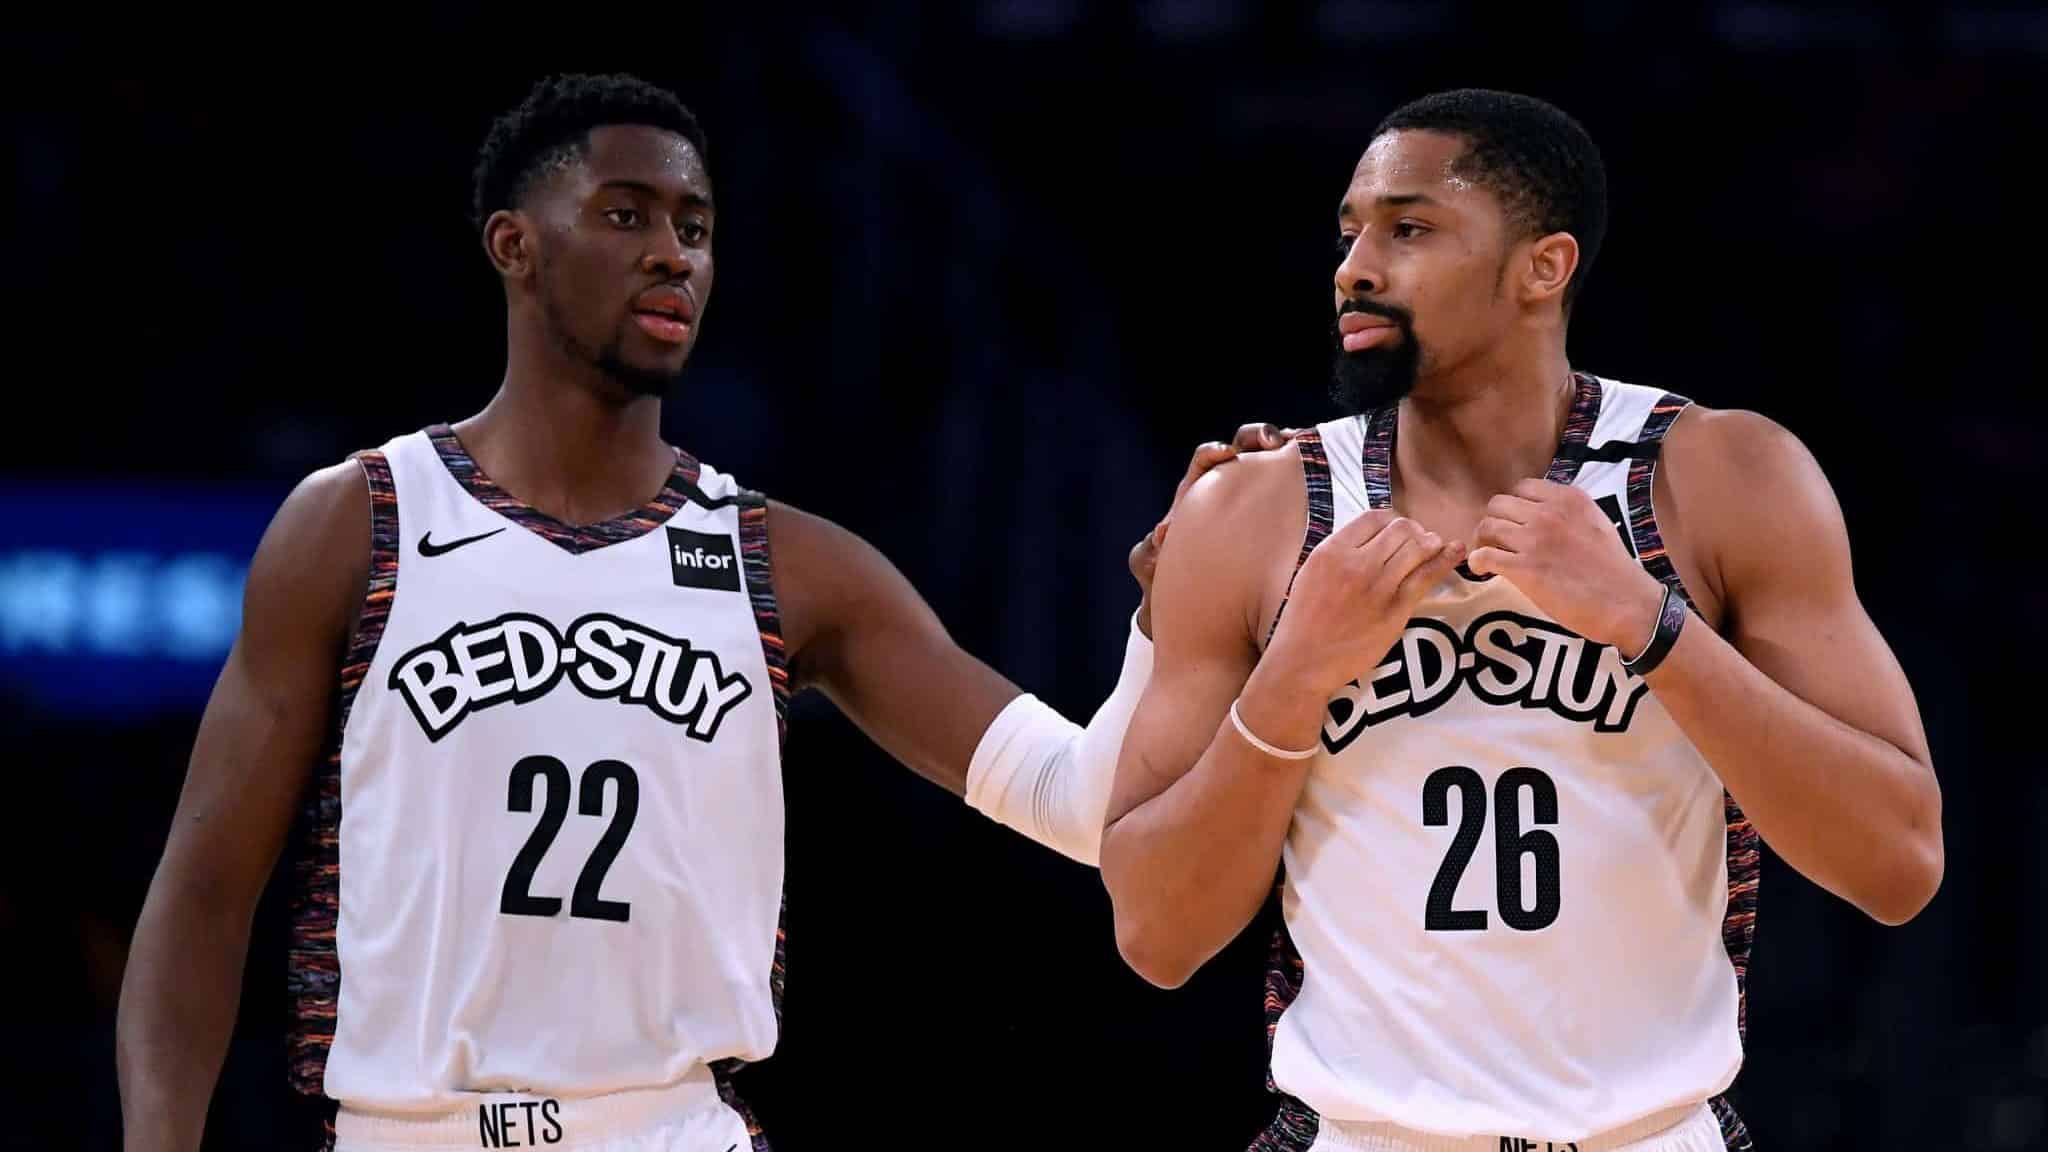 LOS ANGELES, CALIFORNIA - MARCH 10: Spencer Dinwiddie #26 of the Brooklyn Nets reacts to his offensive foul with Caris LeVert #22 during a 104-102 win over the Los Angeles Lakers at Staples Center on March 10, 2020 in Los Angeles, California.